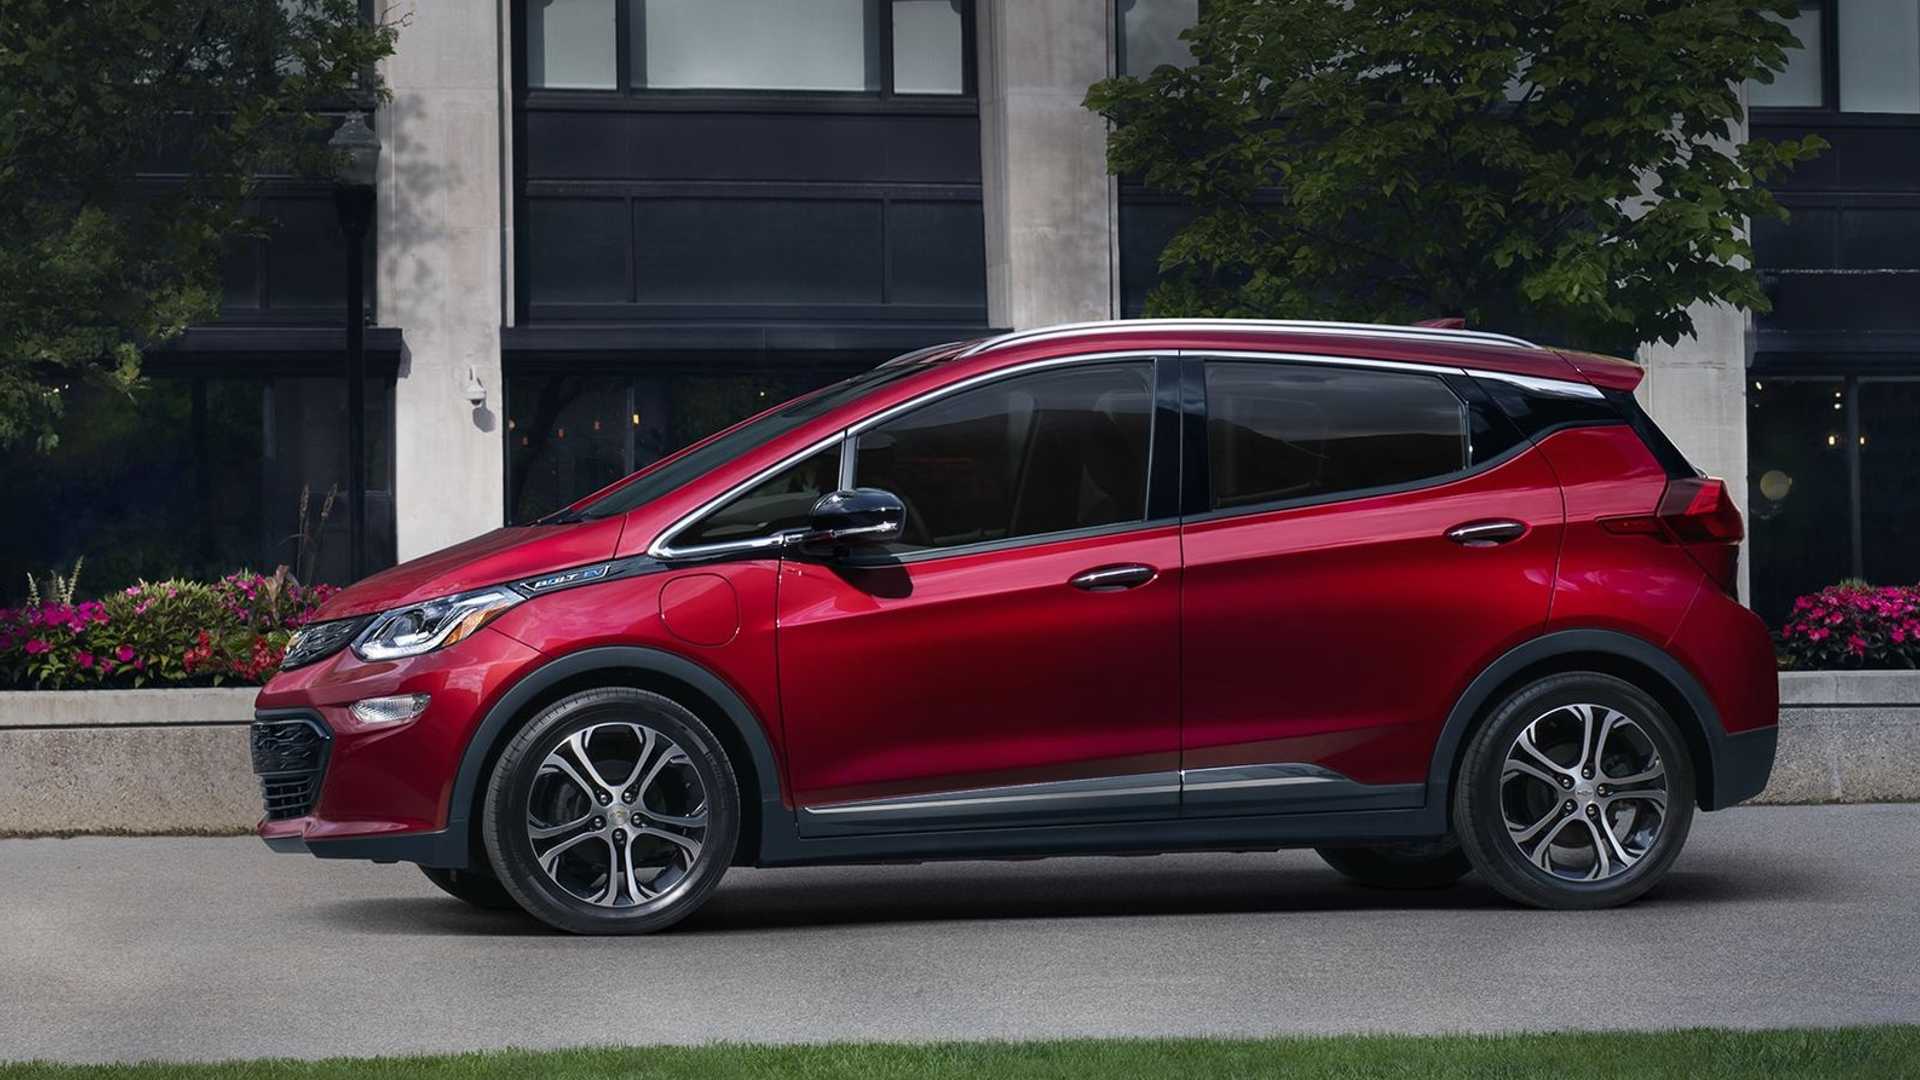 owner ditches gas hyundai kona for used chevy bolt ev, ends up with money in her pocket